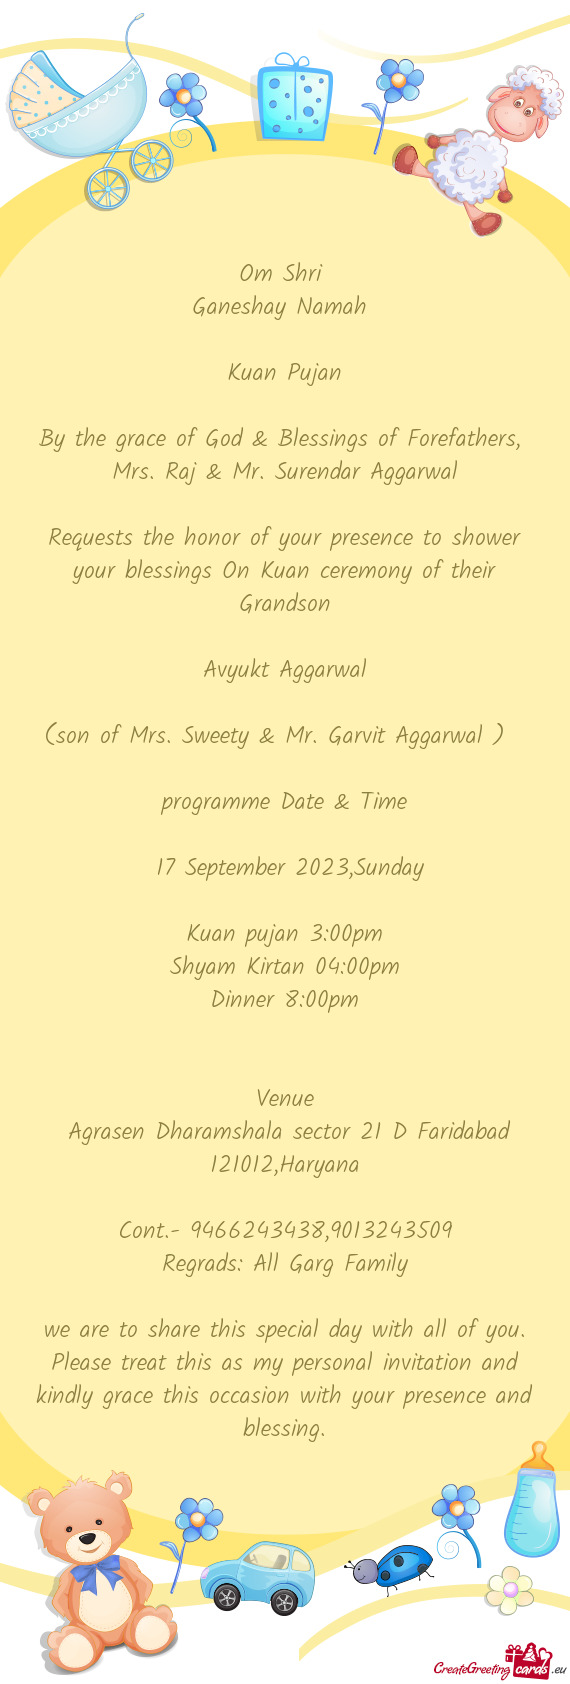 Requests the honor of your presence to shower your blessings On Kuan ceremony of their Grandson